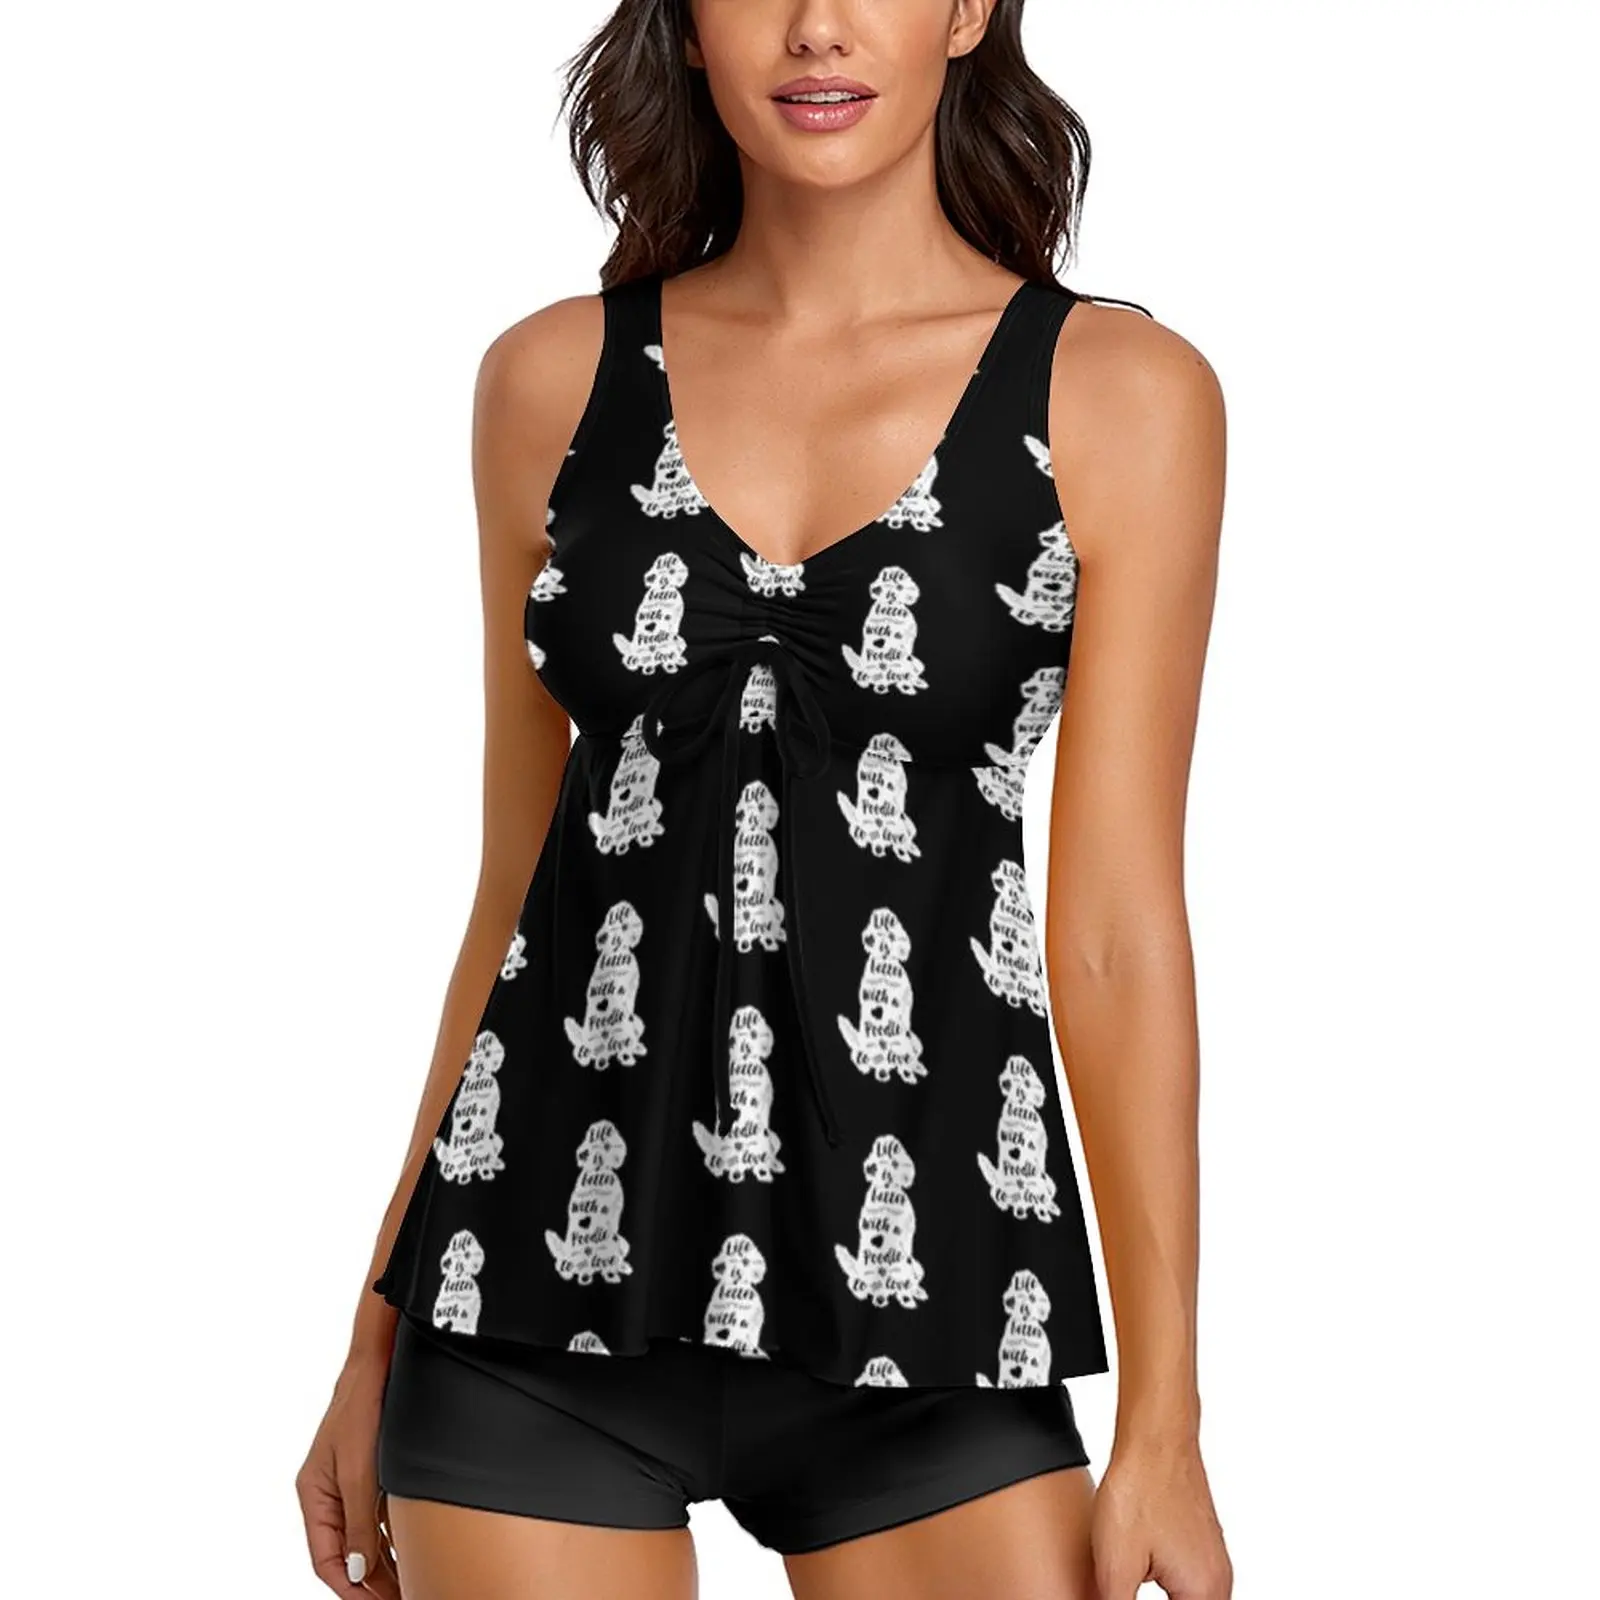 

Cute Poodle Print Tankini Swimsuit Life Is Better Swimwear Stylish Swimsuits Female Two Piece Fitness Beach Outfits